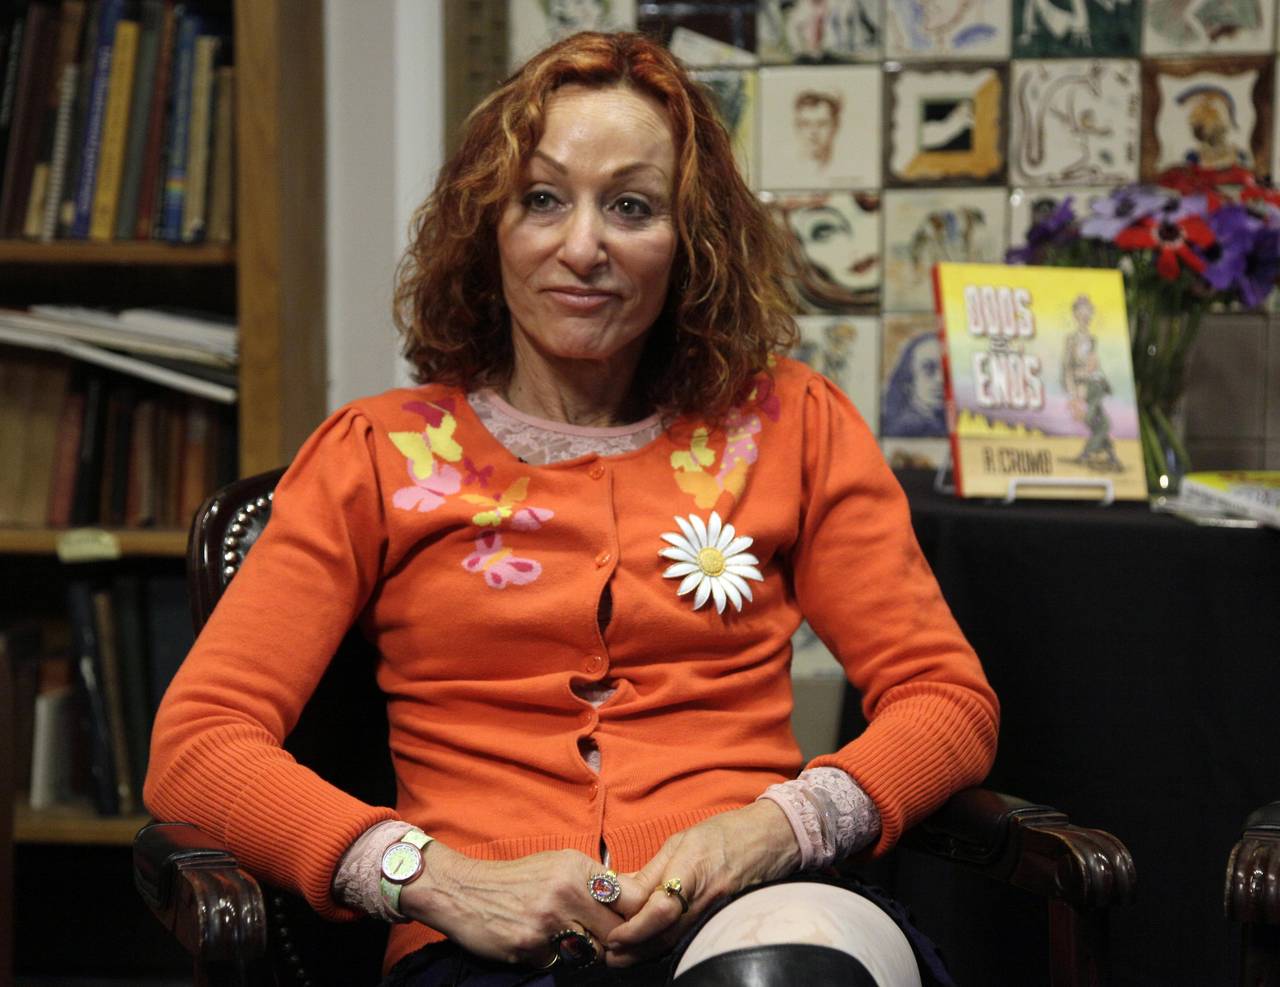 FILE - Comics illustrator Aline Kominsky-Crumb appears during an interview at the Society of Illust...